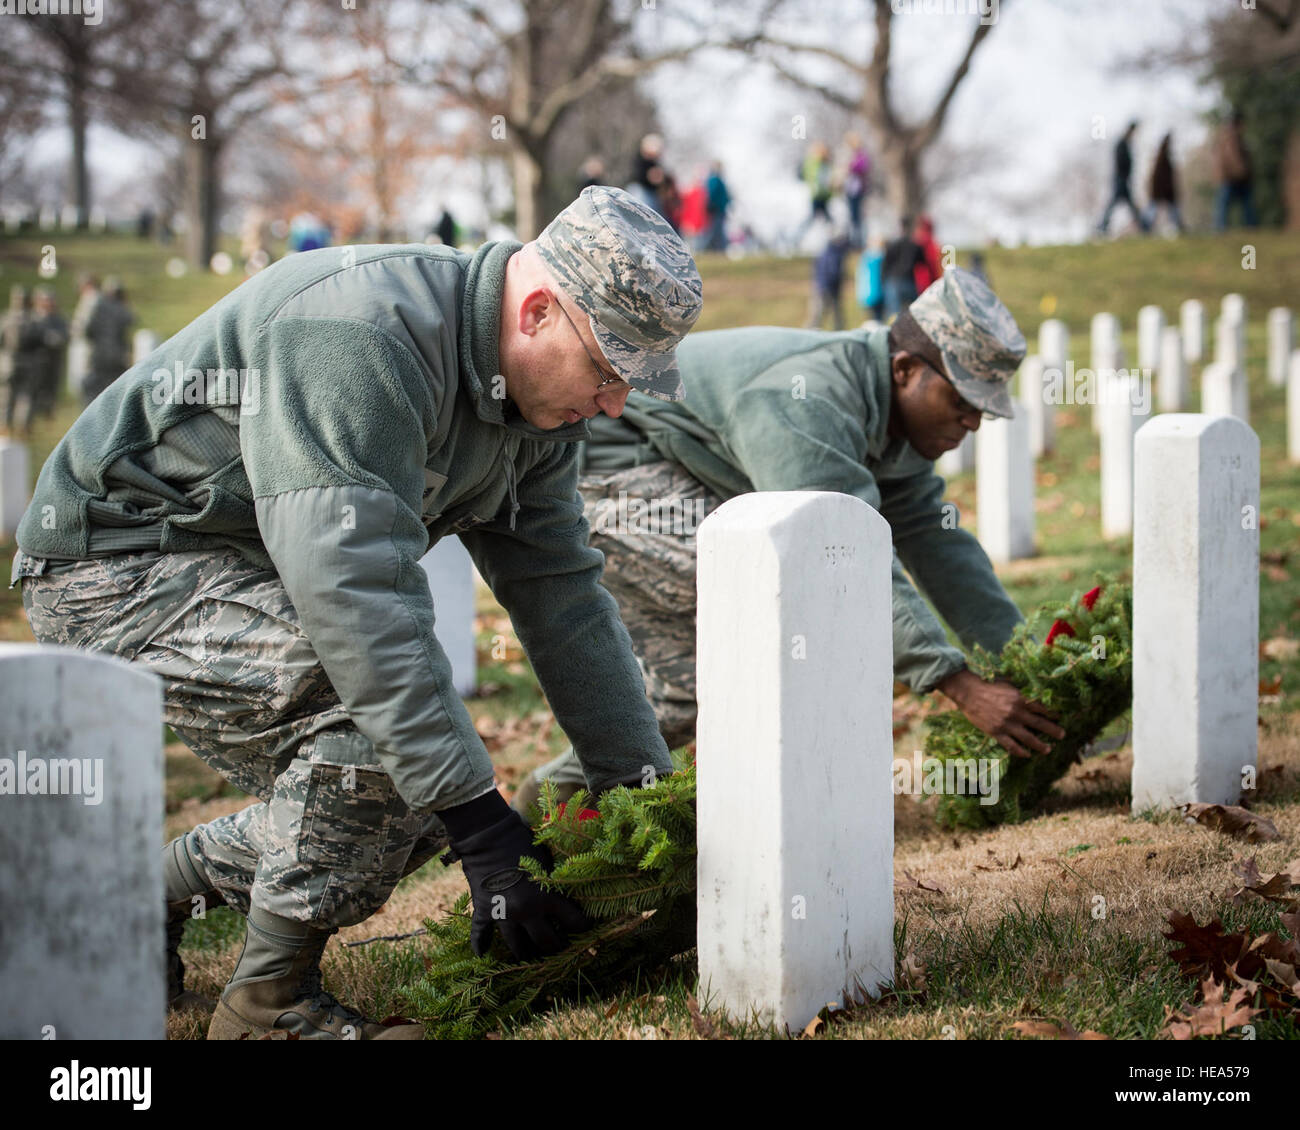 Tech. Sgt. Richy Kruger and Senior Airman James Arredon, Airmen assigned to Air Force Mortuary Affairs Operations at Dover Air Force Base, Delaware, place holiday wreaths on two graves at Arlington National Cemetery, Dec. 13, 2014. Both Kruger and Arredon said that volunteering to honor the fallen at Arlington was a natural extension of their duties at AFMAO.  Captain Raymond Geoffroy Stock Photo